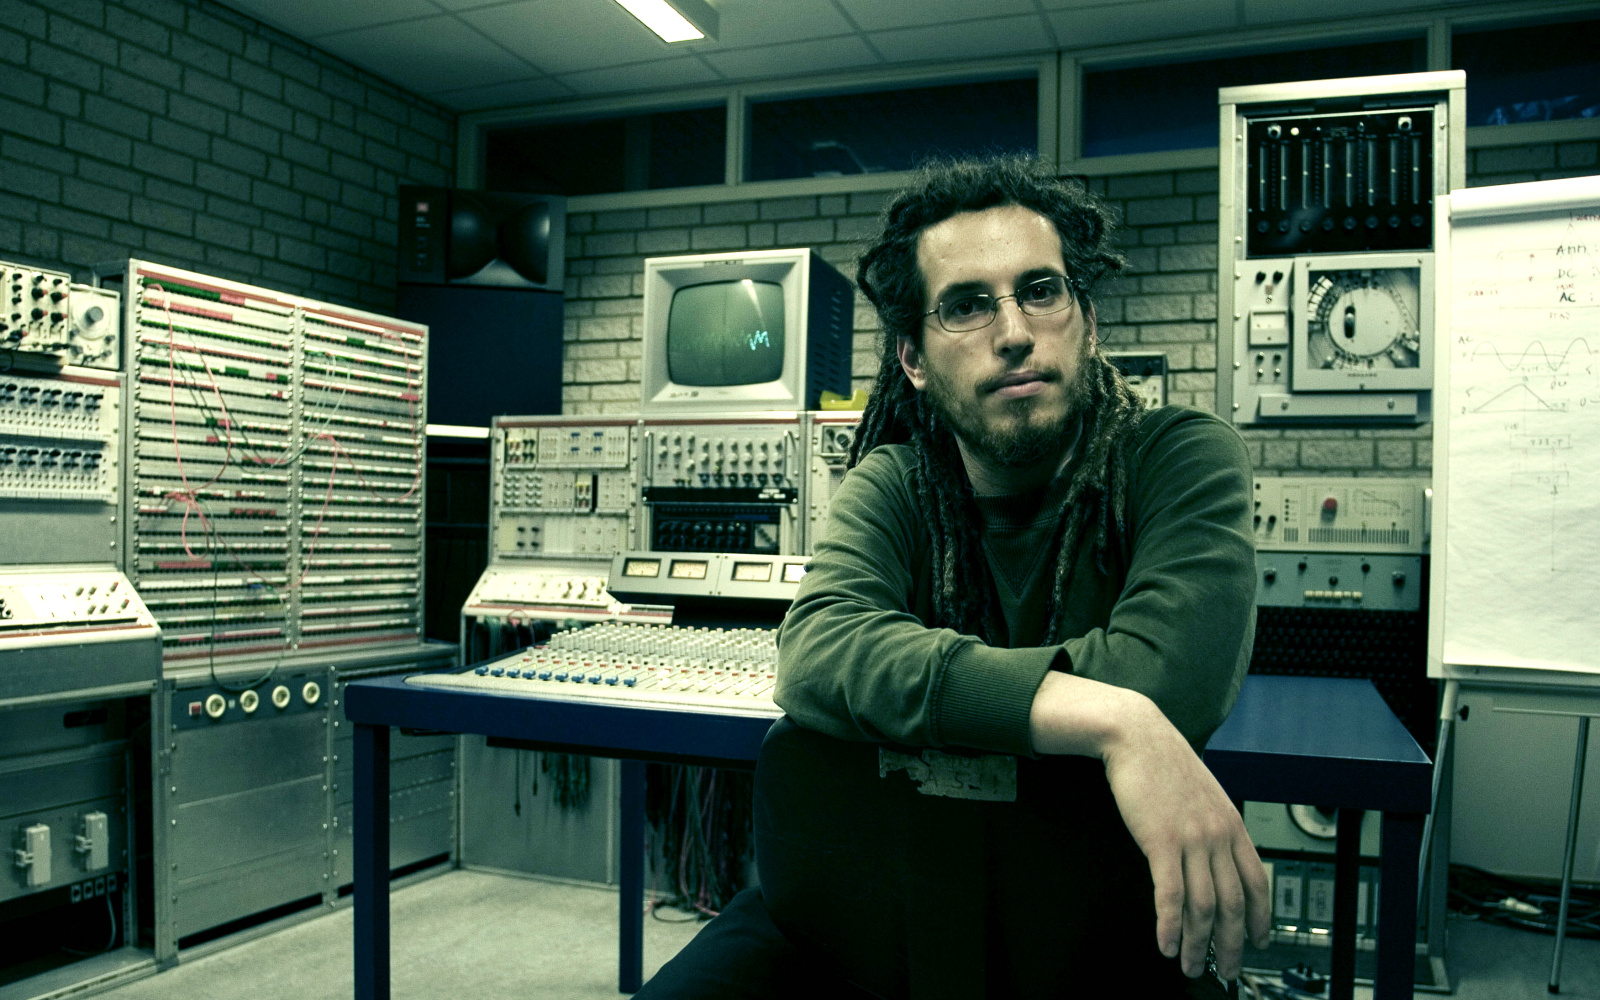 A man with dreadlocks and glasses sitting in front of technical equipment such as PCs, volume controls and other monitors